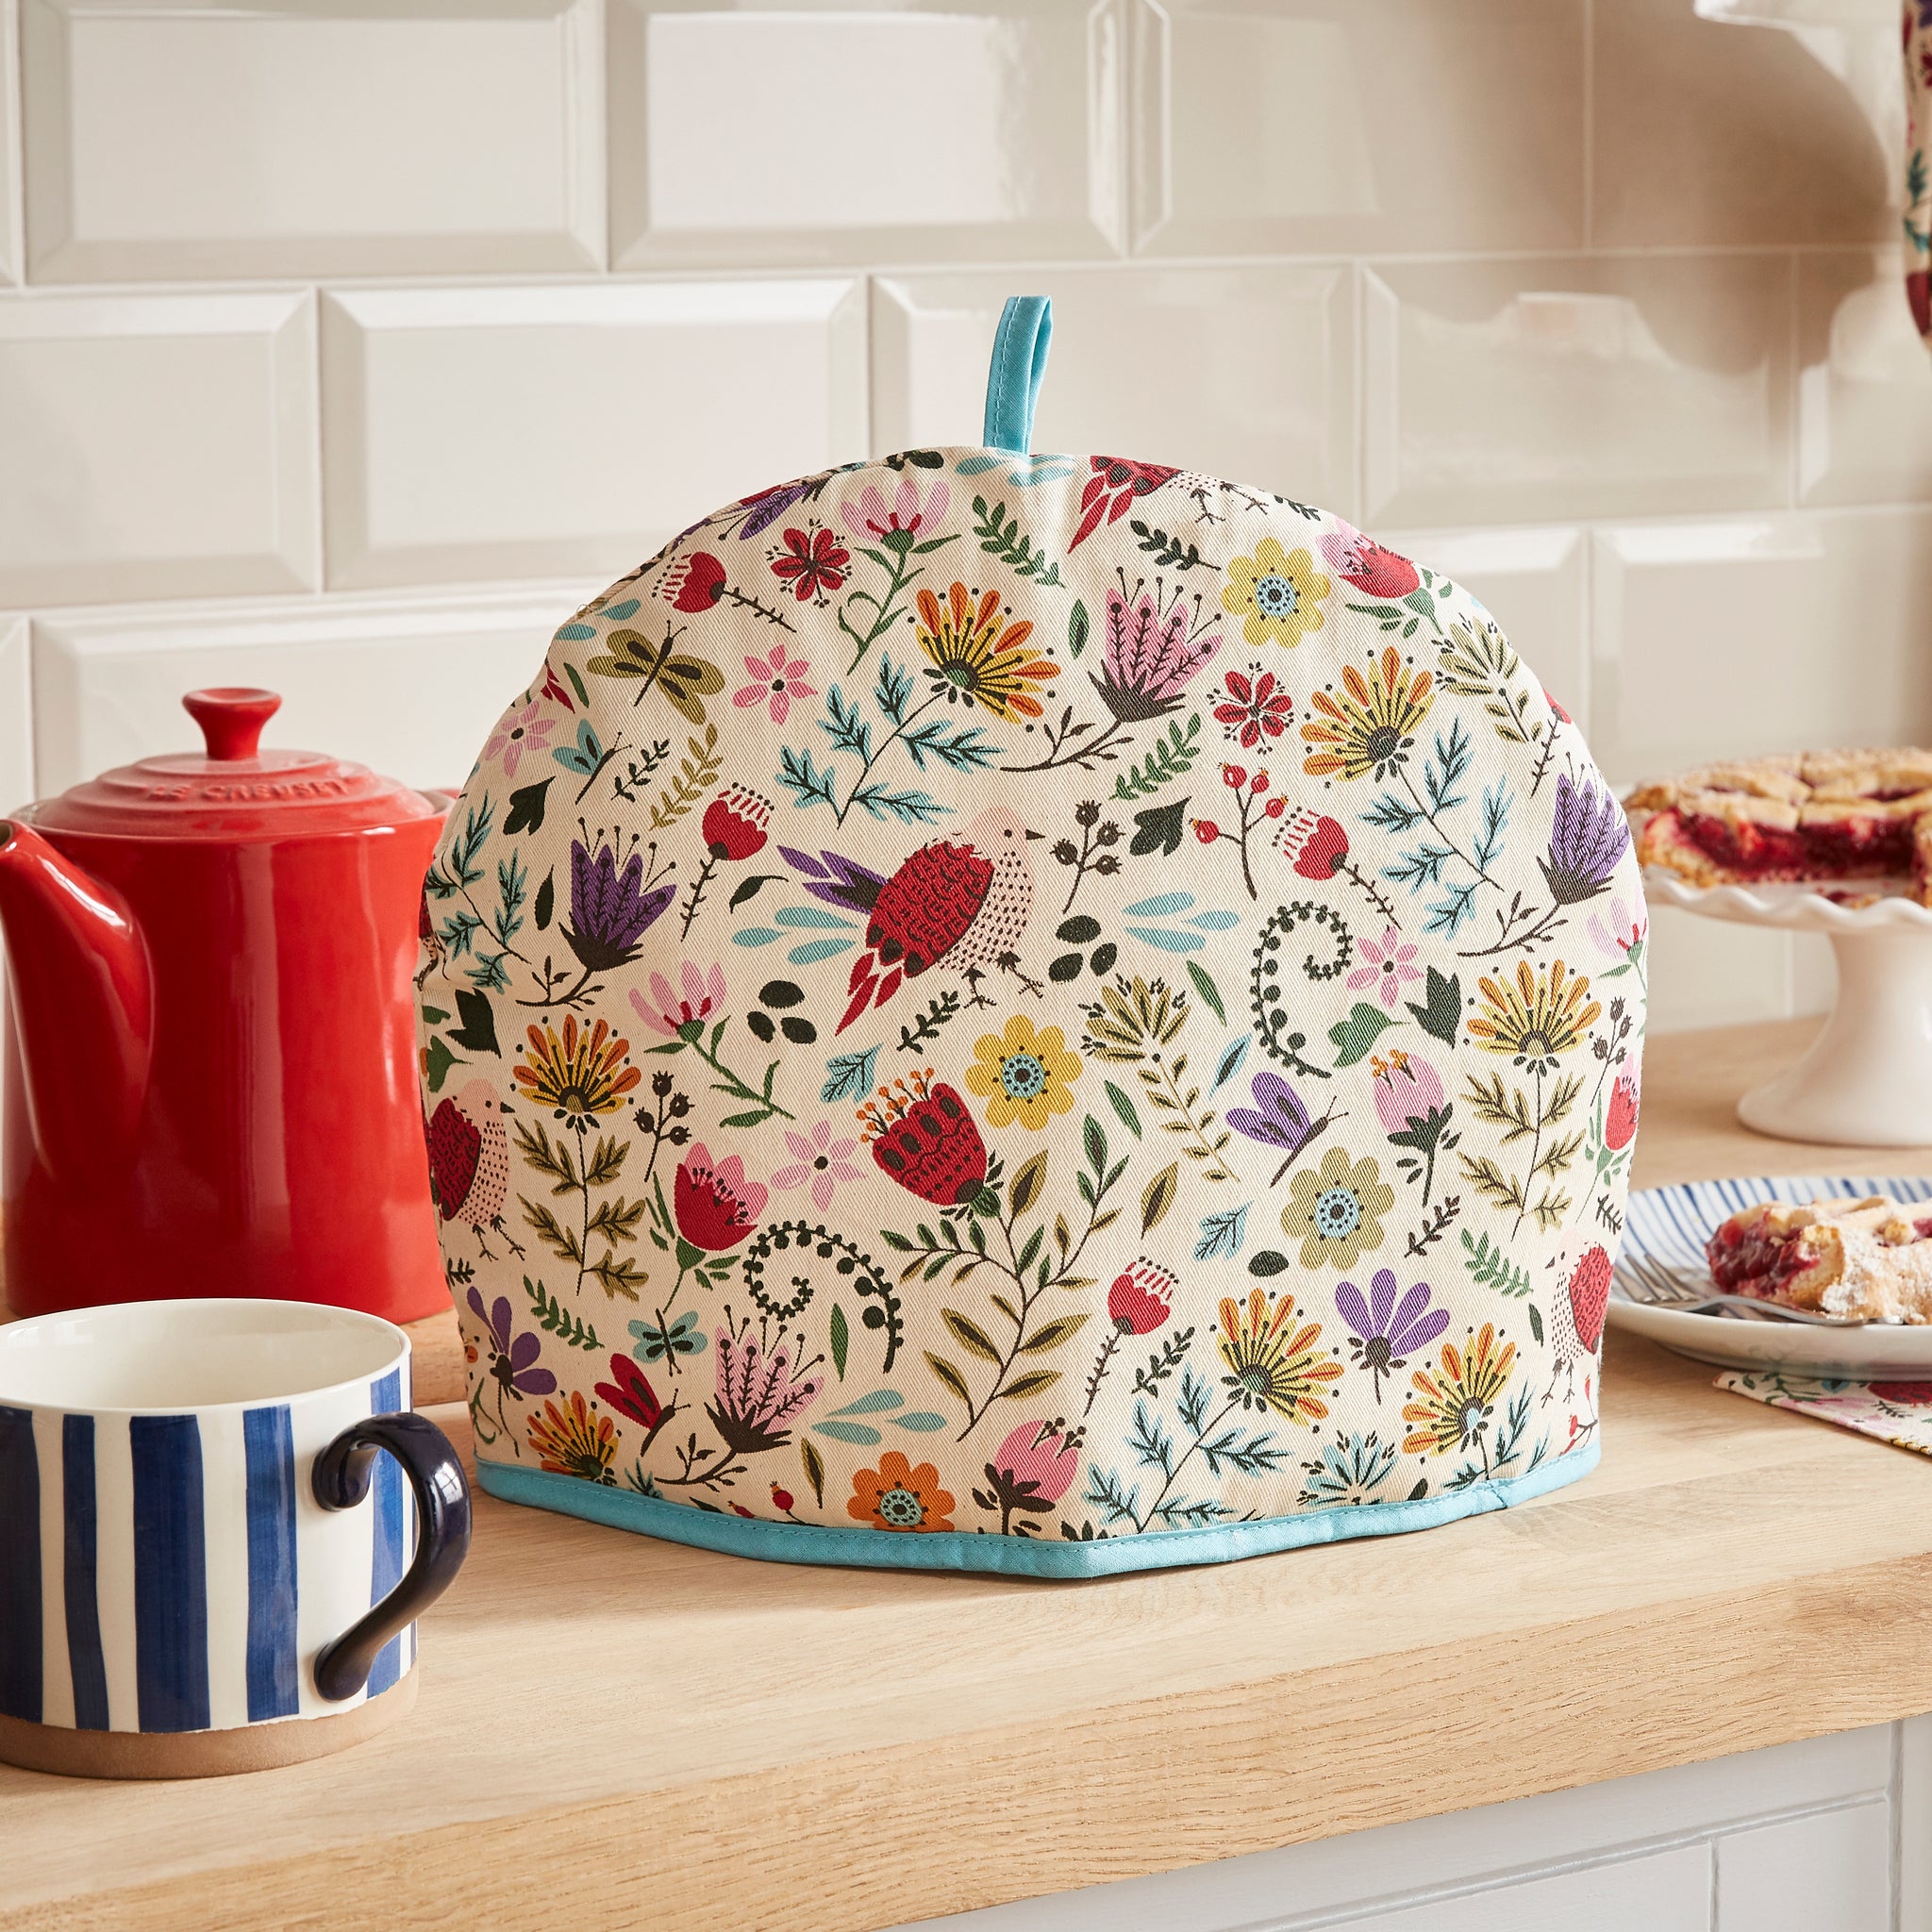 Ulster Weavers Tea Cosy - Melody (100% Cotton Outer; 100% Polyester wadding; CE marked, Cream, 6 Cup Teapot) - Tea Cosy - Ulster Weavers